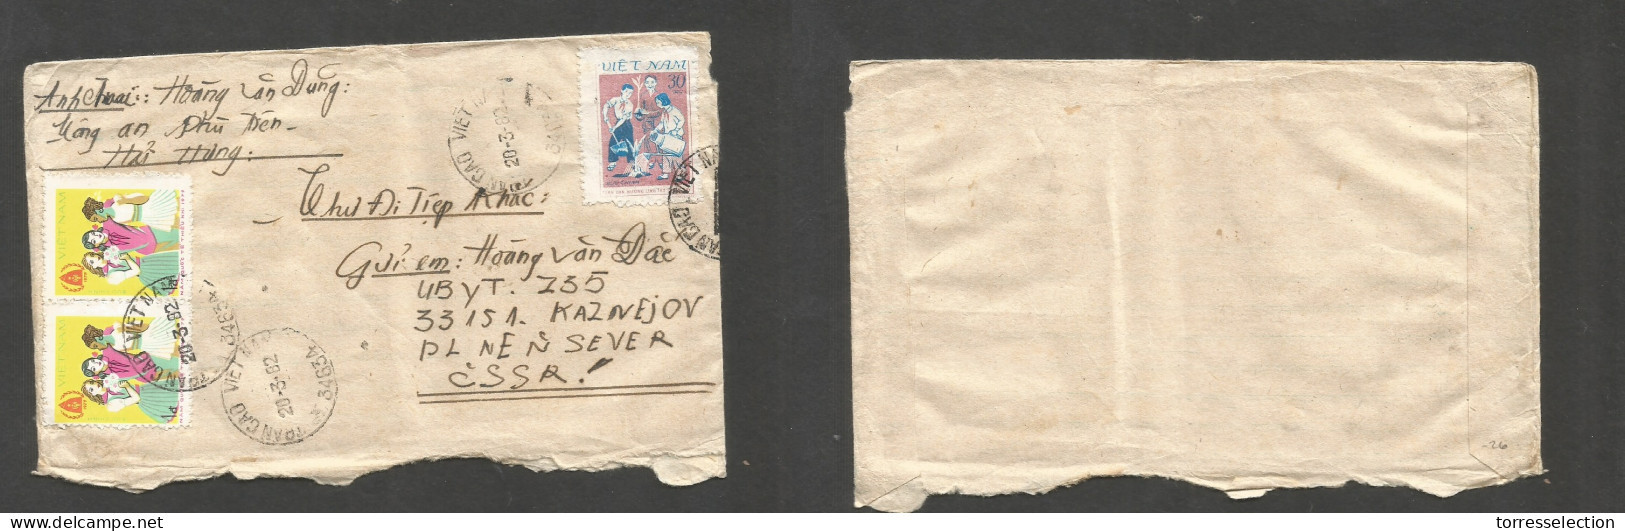 INDOCHINA. 1982 (20 March) North Vietnam. Trancao - Czech Republic. Color Multifkd Envelope At 2,30d Rate. VF, Tied Cds. - Sonstige - Asien